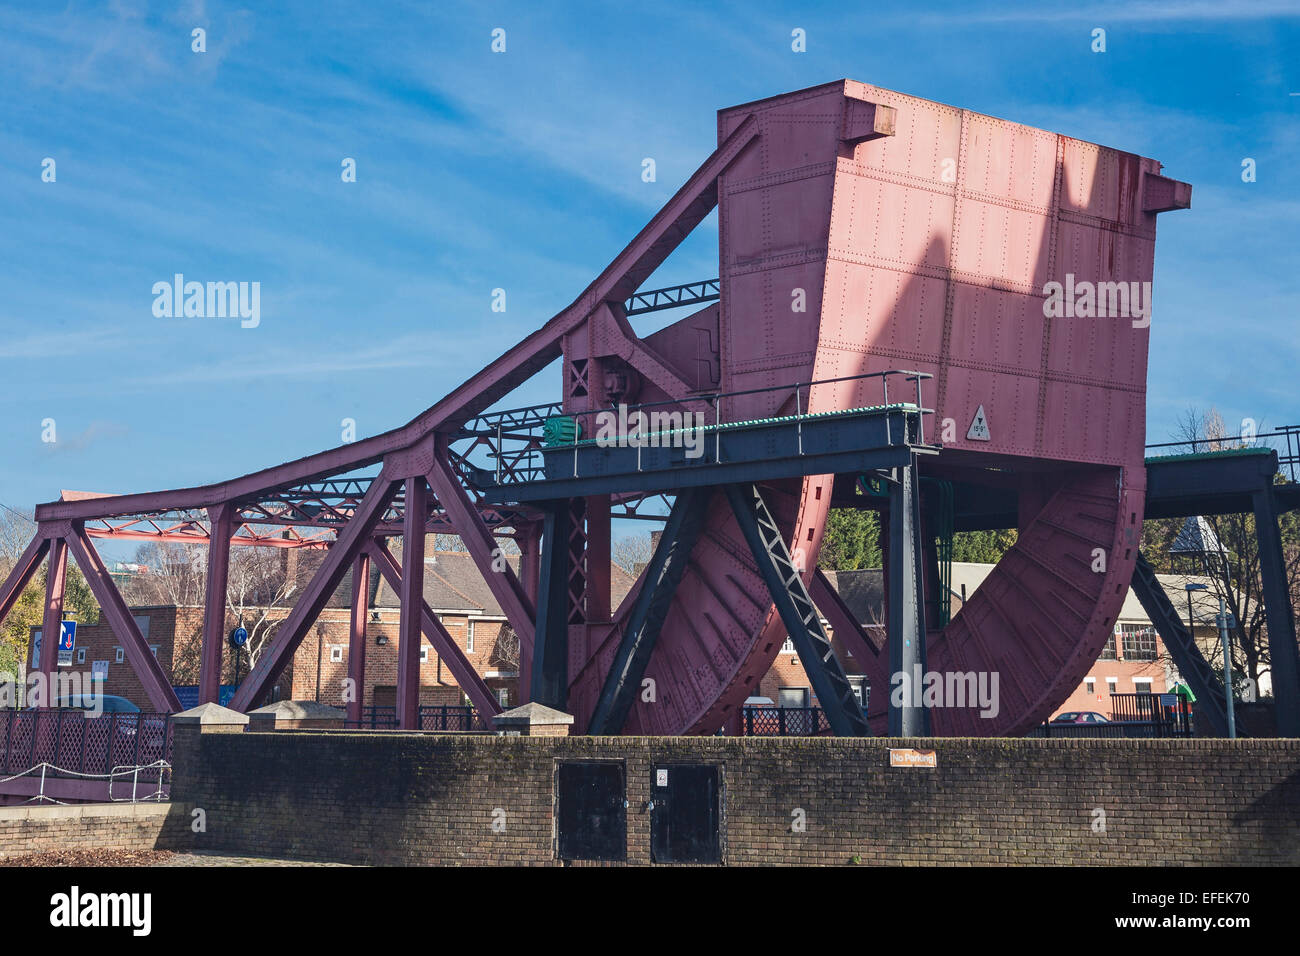 London, Shadwell Basin   The Garnet Street steel bascule road bridge dating from the early 1930s Stock Photo